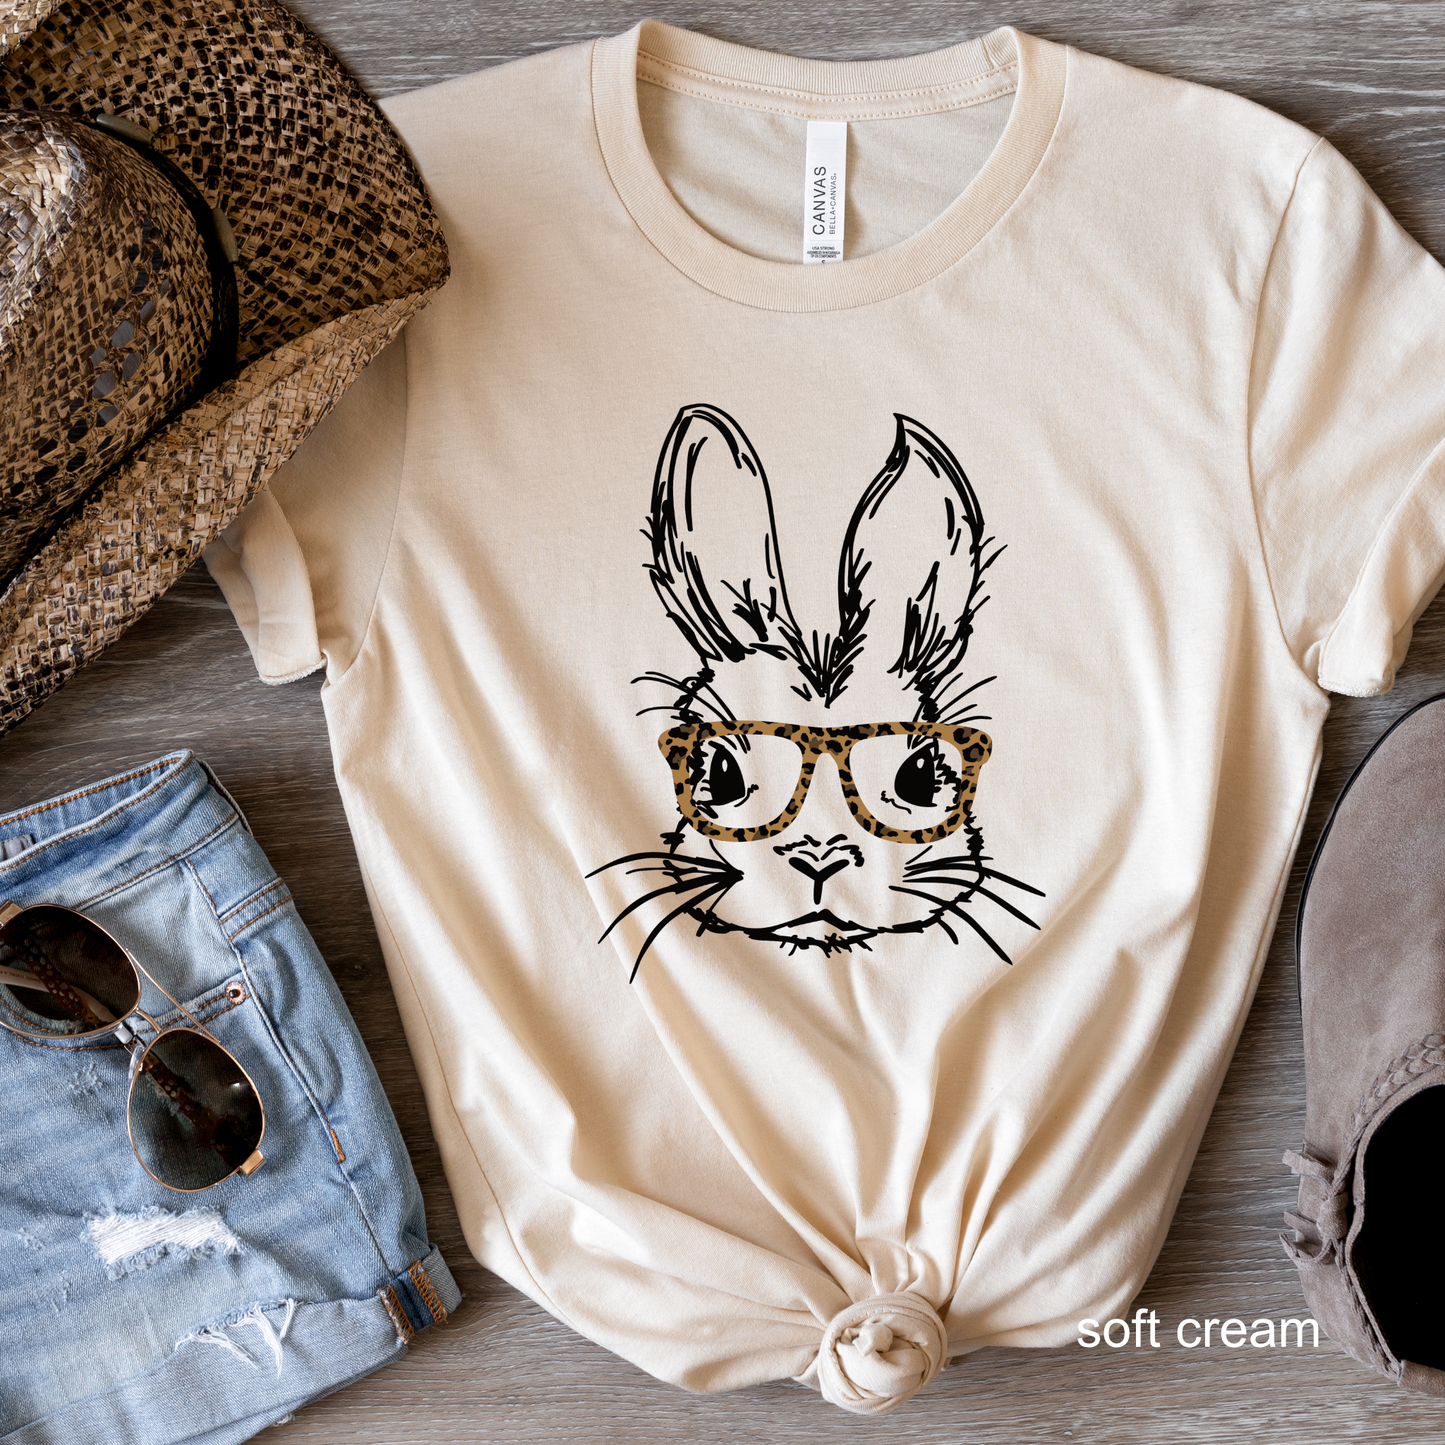 Bunny with Leopard Glasses - Toddler - Youth - Adult Short Sleeve